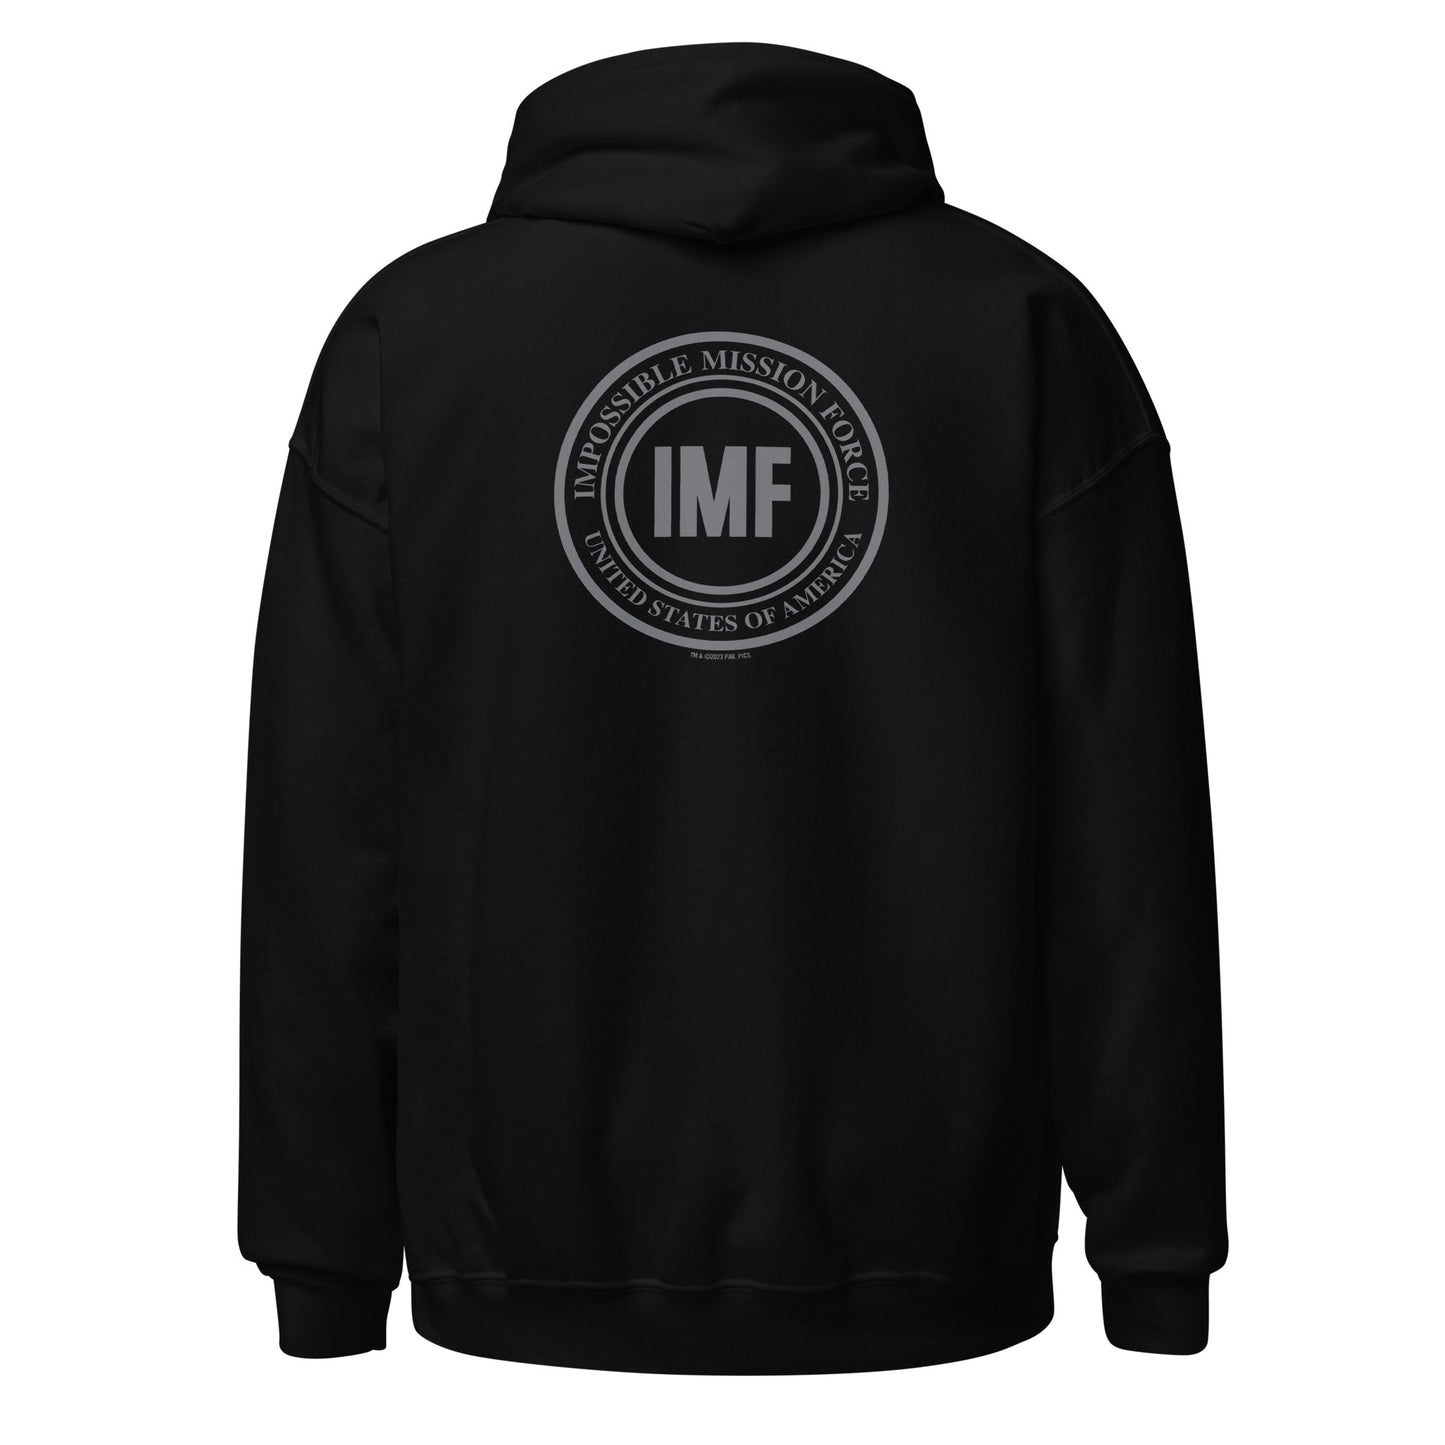 Mission: Impossible - Dead Reckoning Logo Hoodie - Paramount Shop